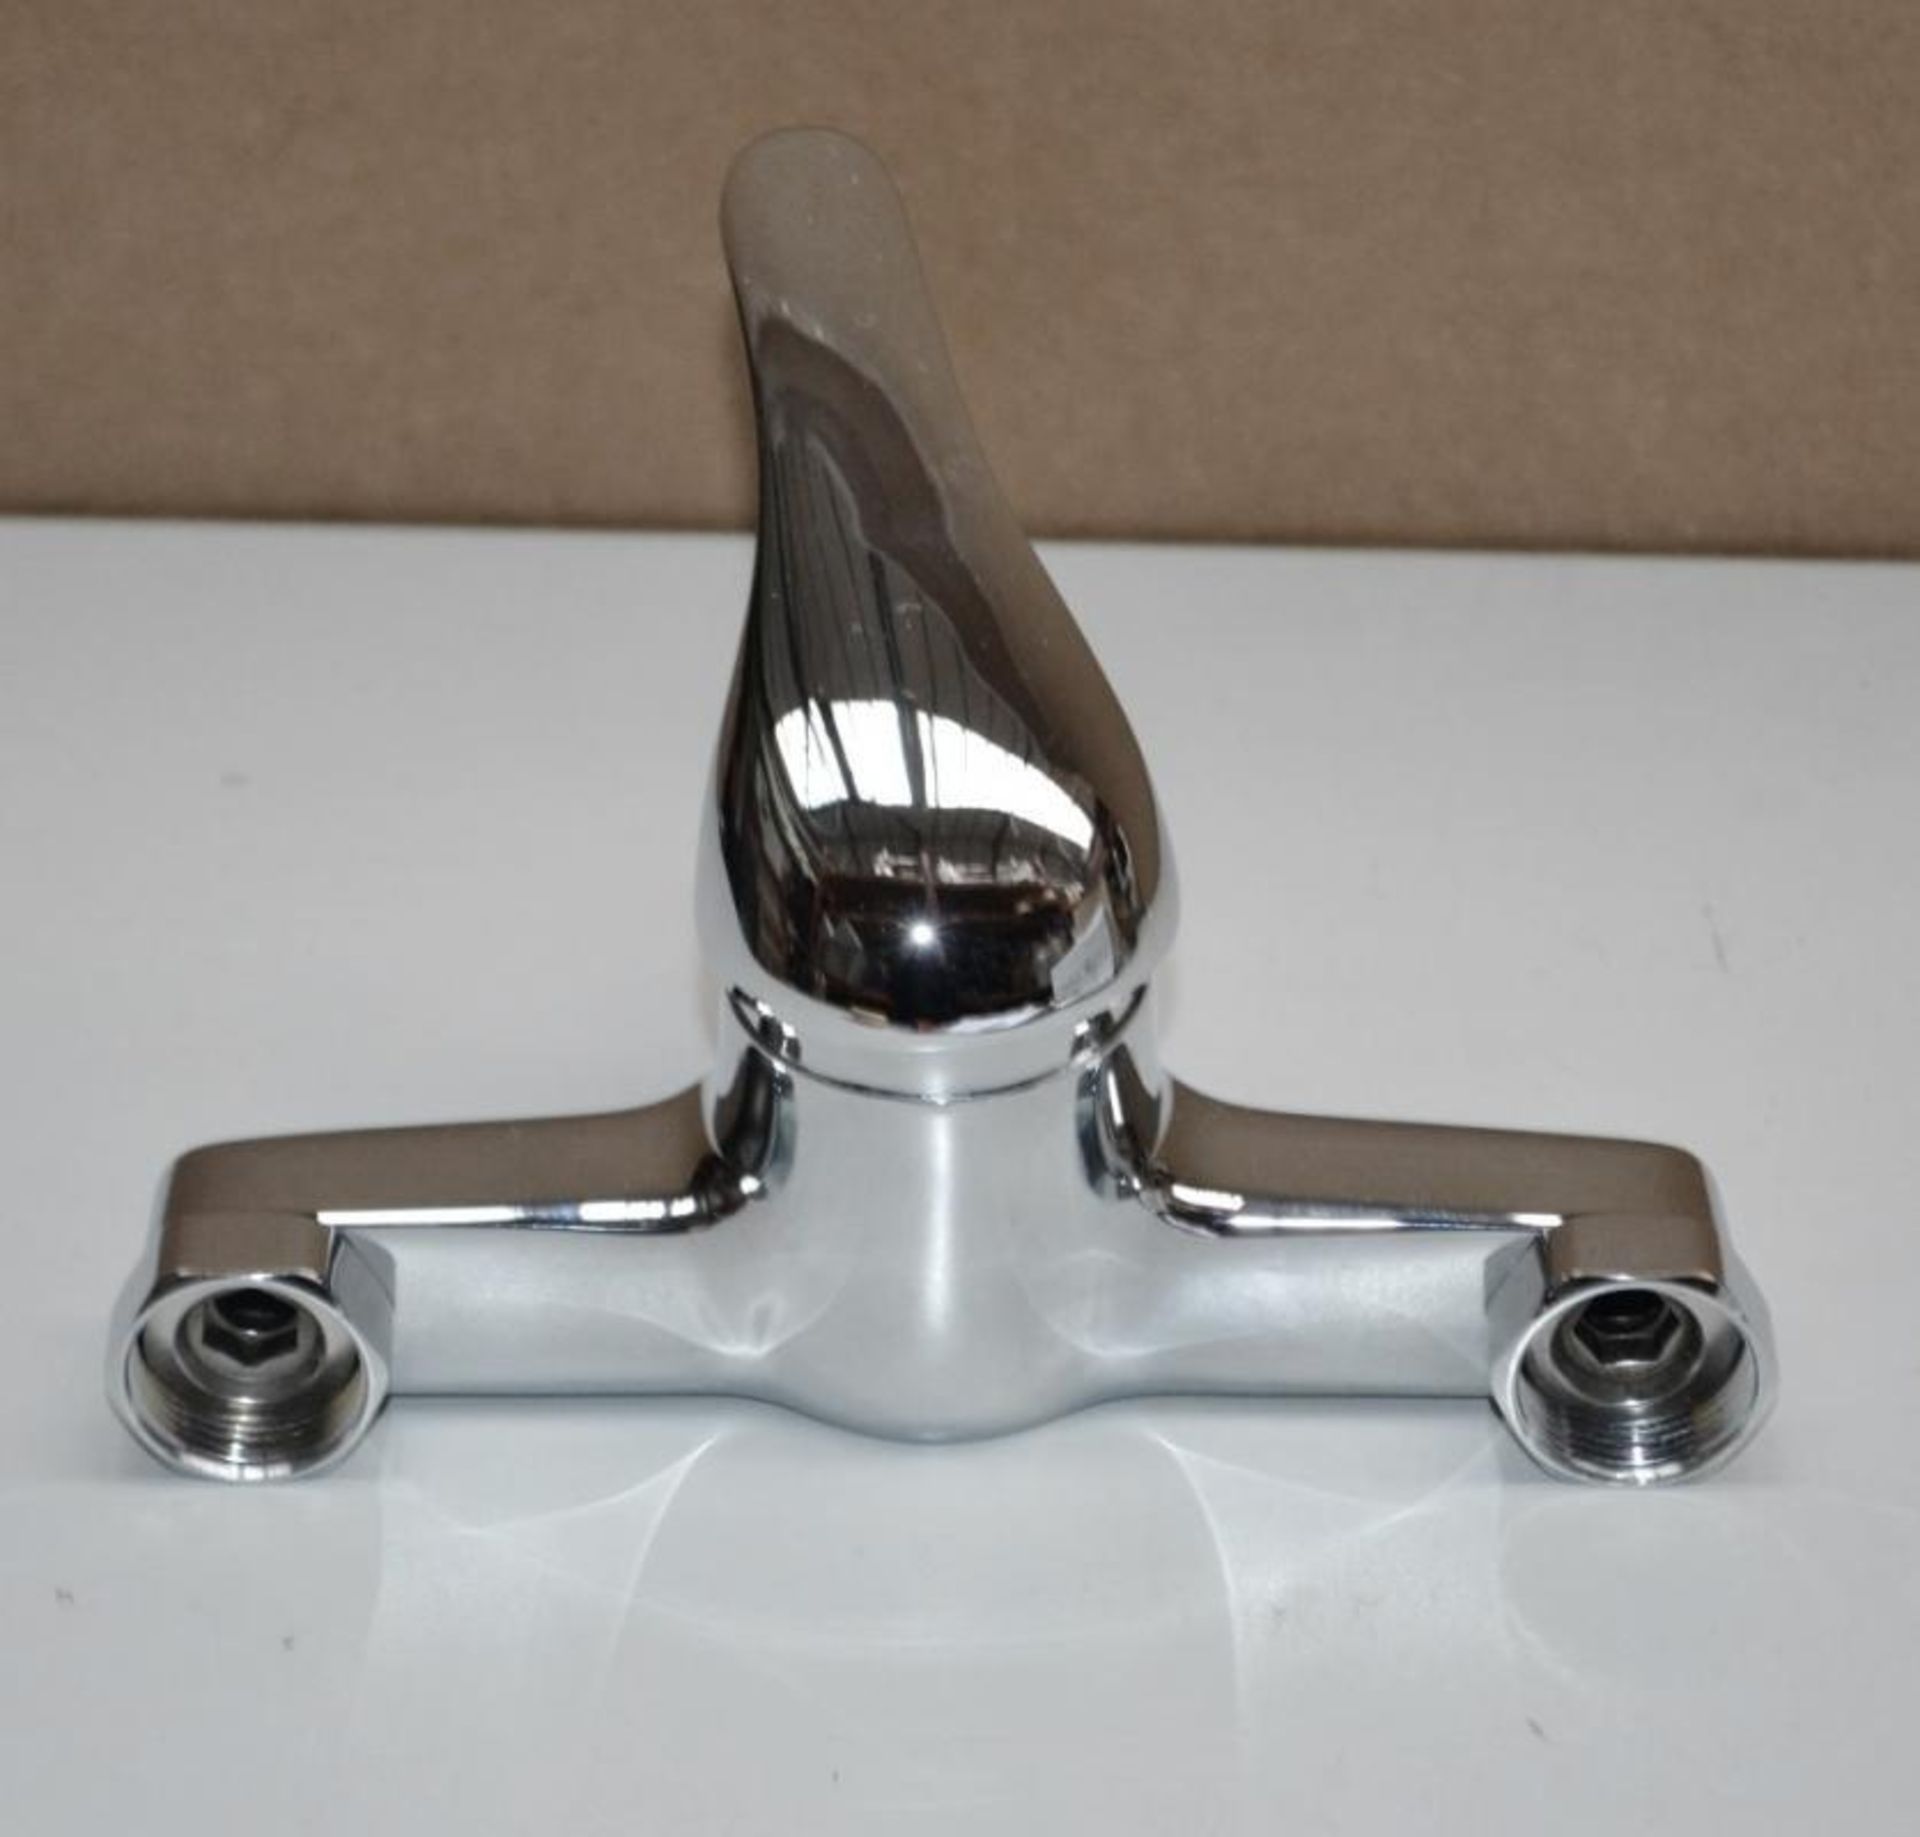 1 x PULSE Single Lever Bath Shower Mixer Tap In Chrome (Model: 112G2) - Ref: M188 - CL190 - Unused B - Image 7 of 7